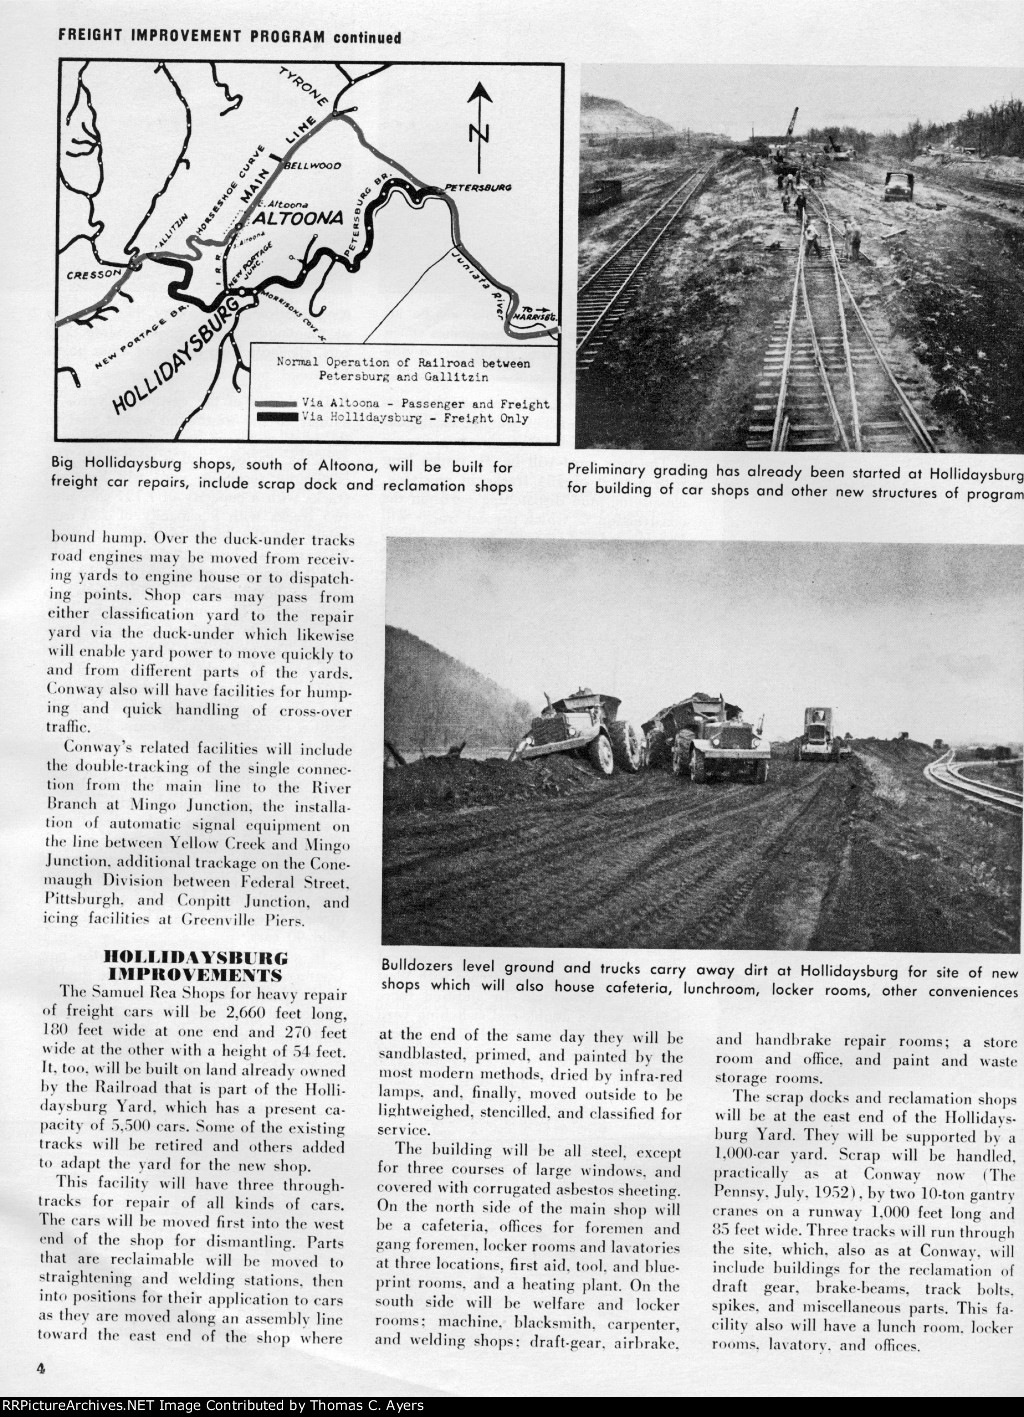 "PRR To Invest $47M," Page 4, 1952